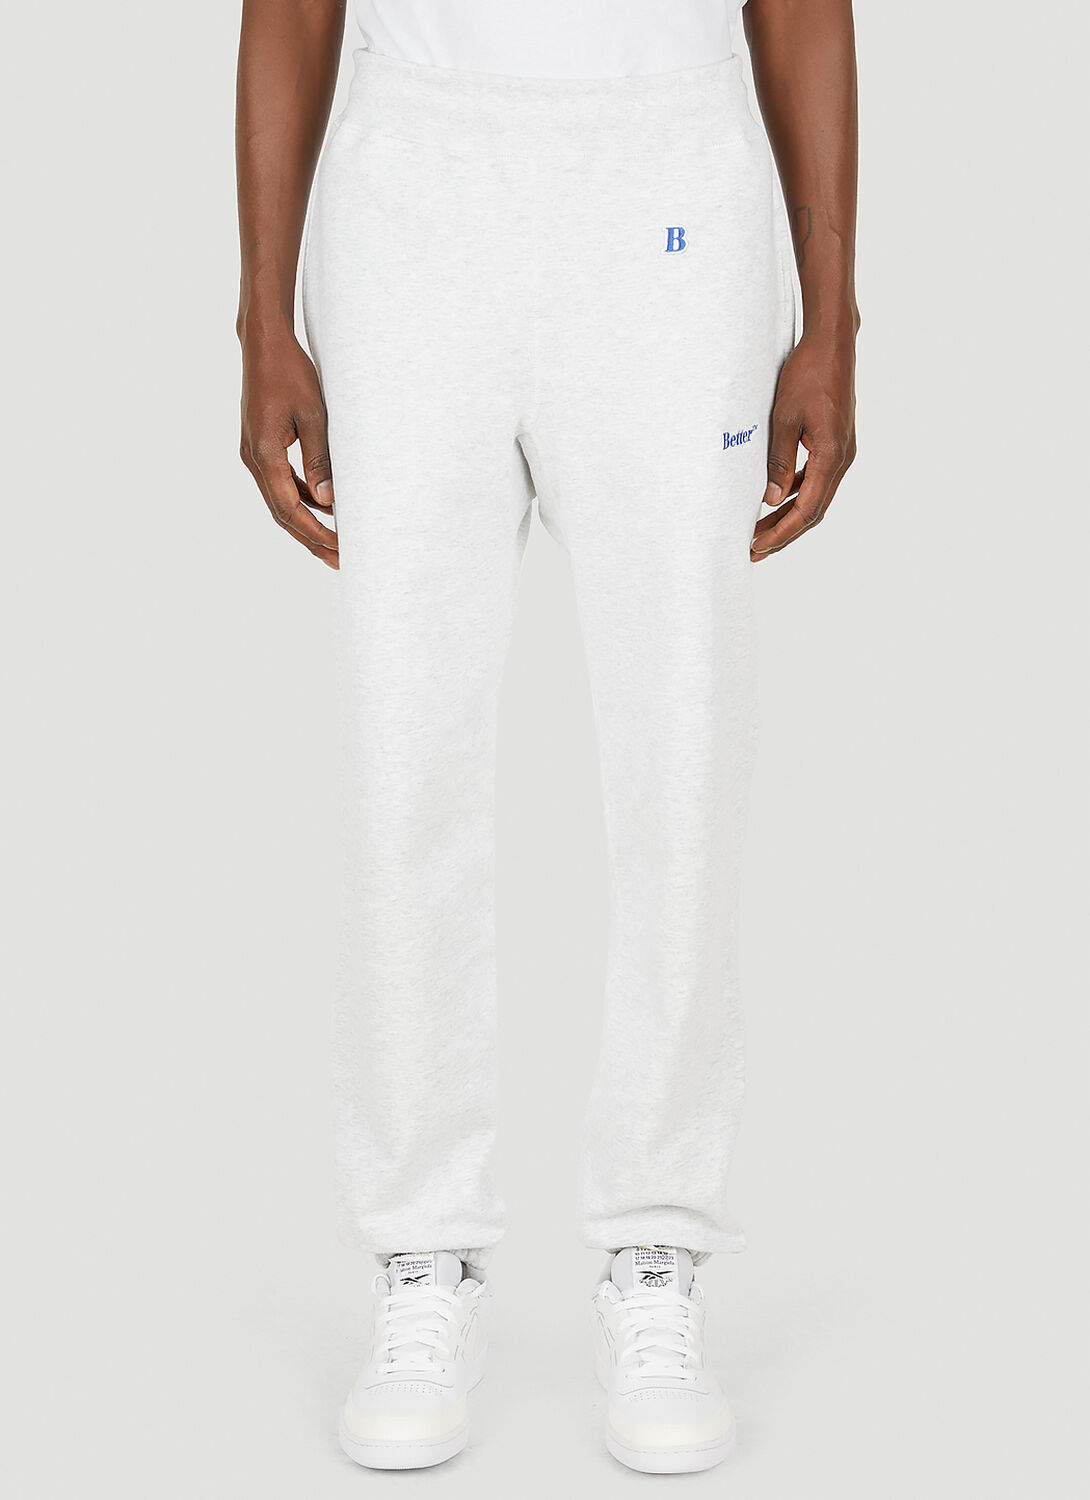 BETTER GIFT SHOP EMBROIDERED TRACK PANTS